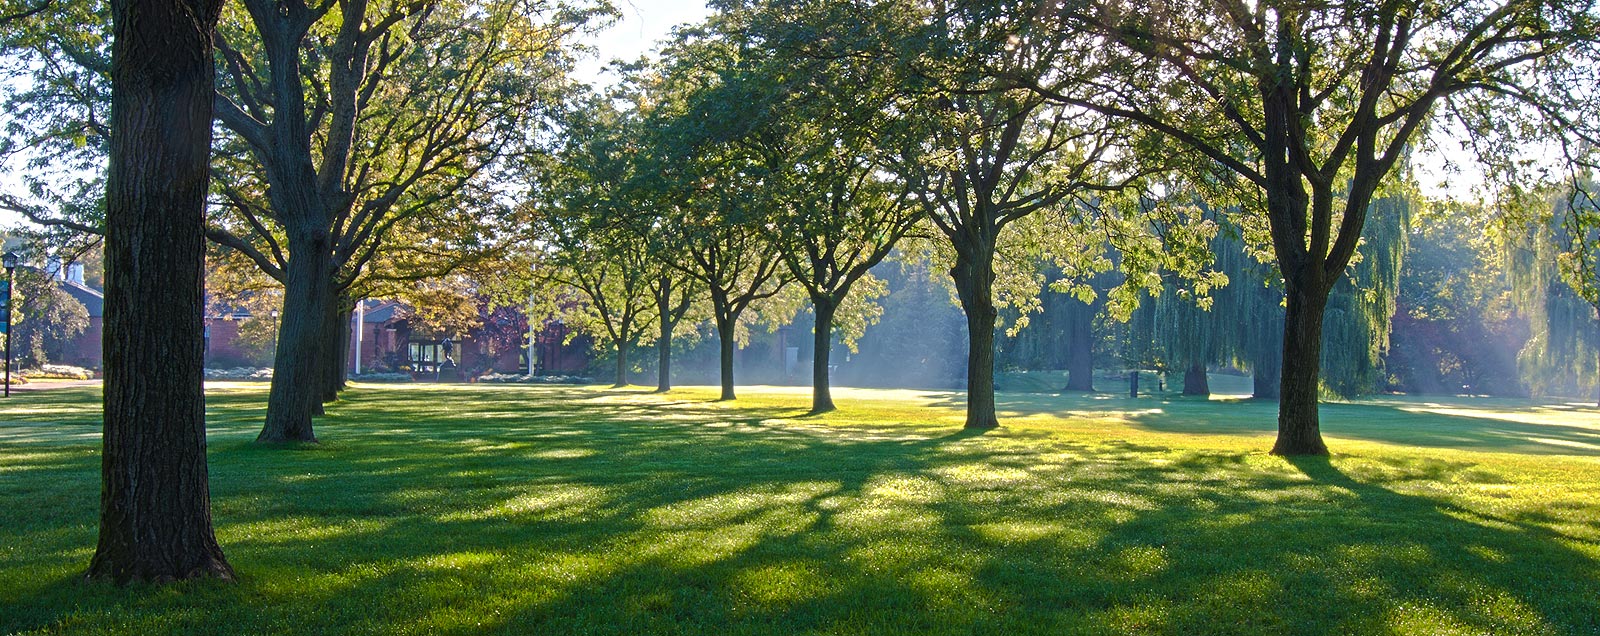 A grassy field with tree care in the sunlight.